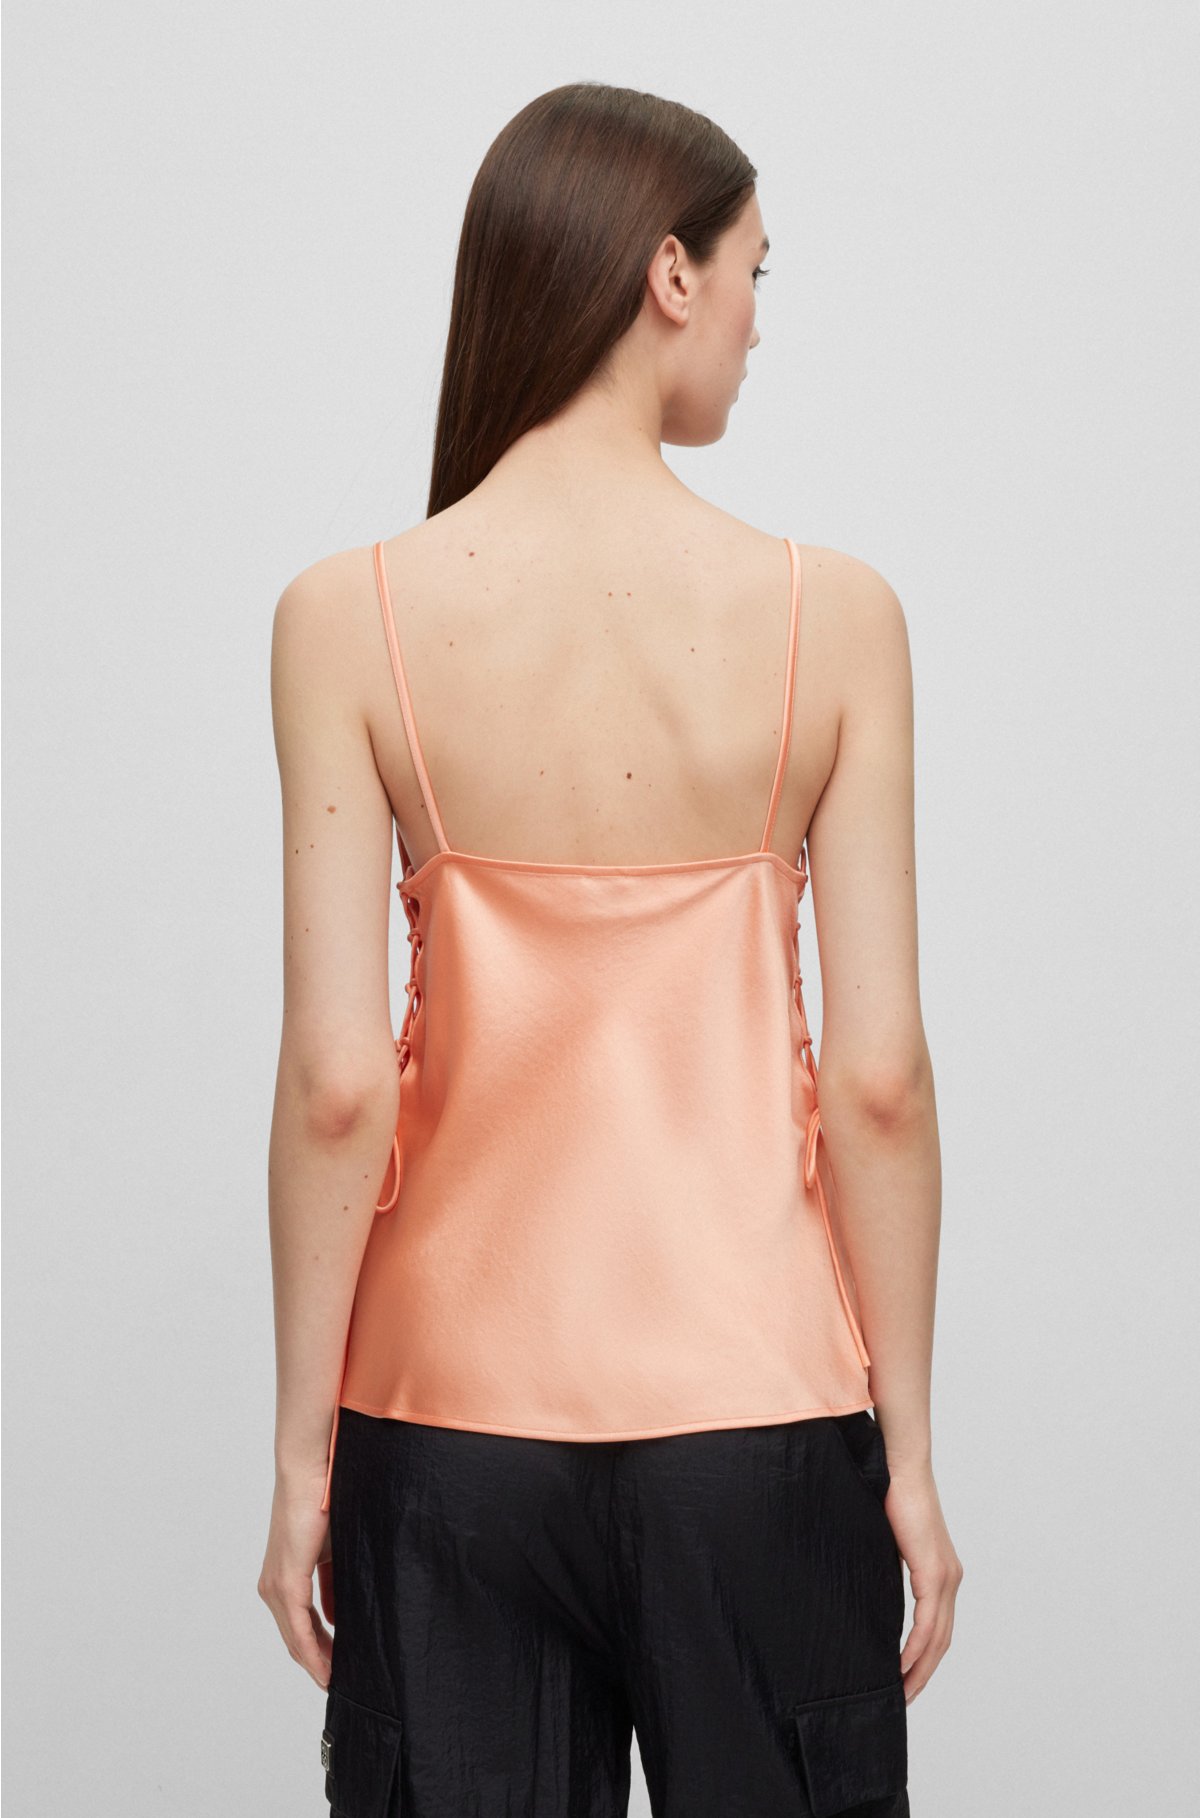 Silk Satin Strappy Camisole Top For Women Elegant And Sexy Summer Tank With  Backless Design Perfect For Holidays, Beach And Suntan Beach From Jeans989,  $13.07